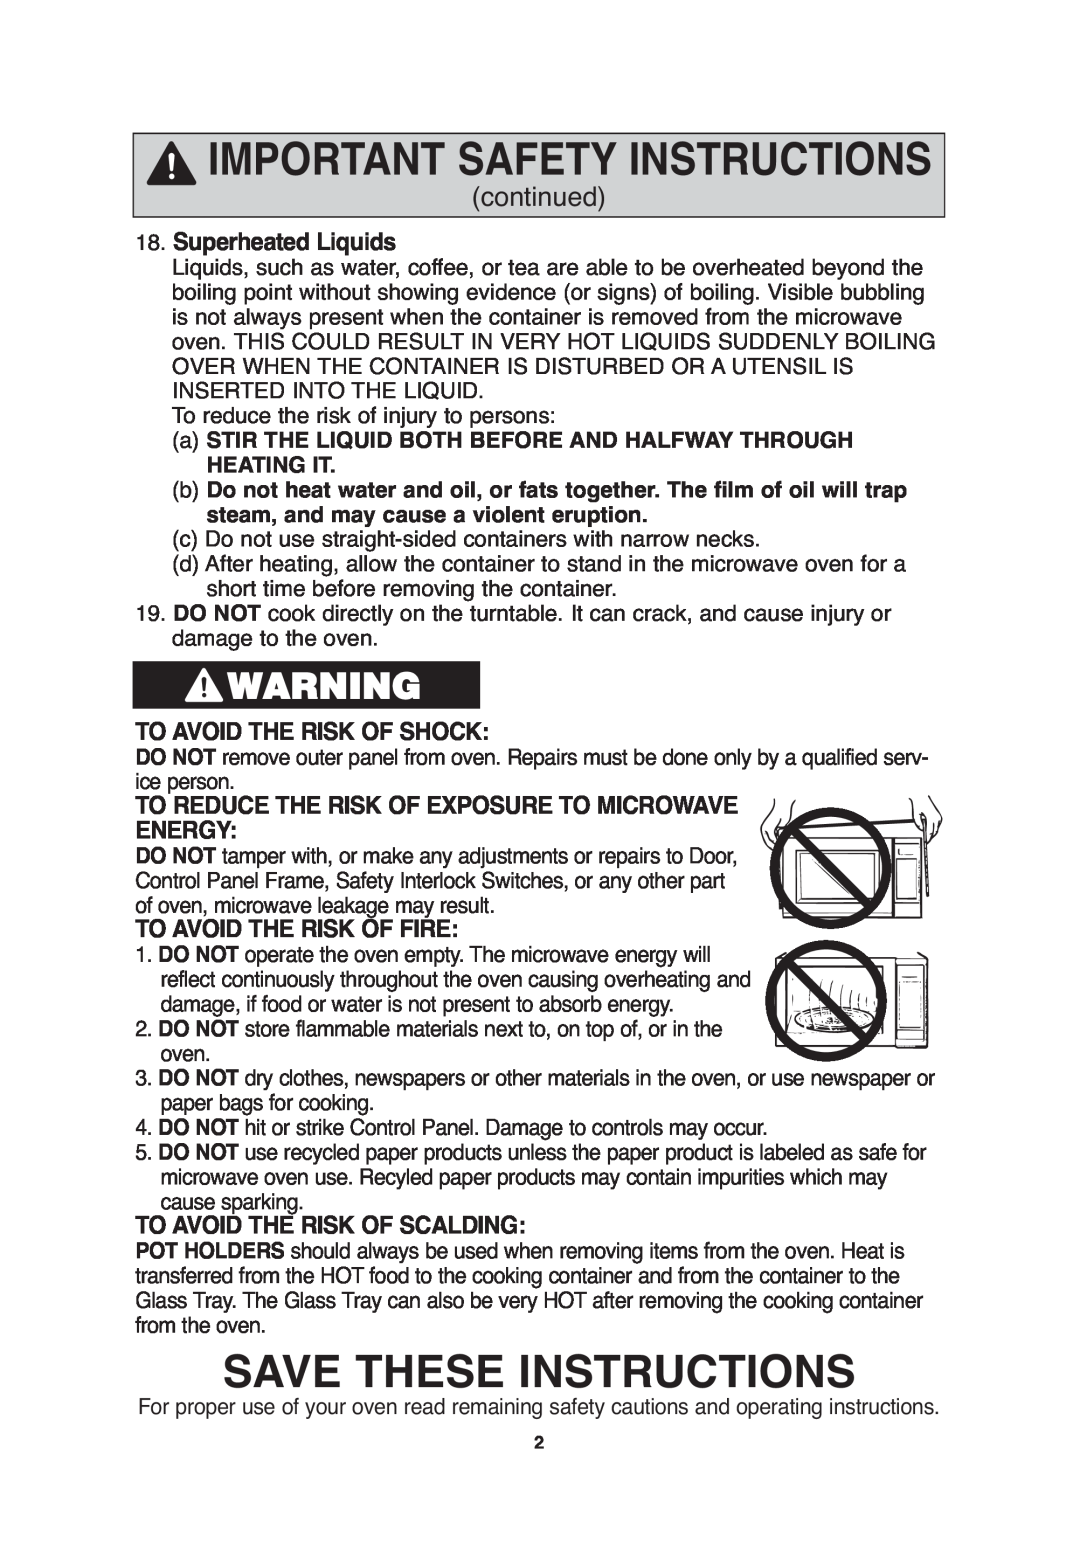 Panasonic NN-S635, NN-S654 Save These Instructions, continued, Superheated Liquids, To Avoid The Risk Of Shock, Energy 